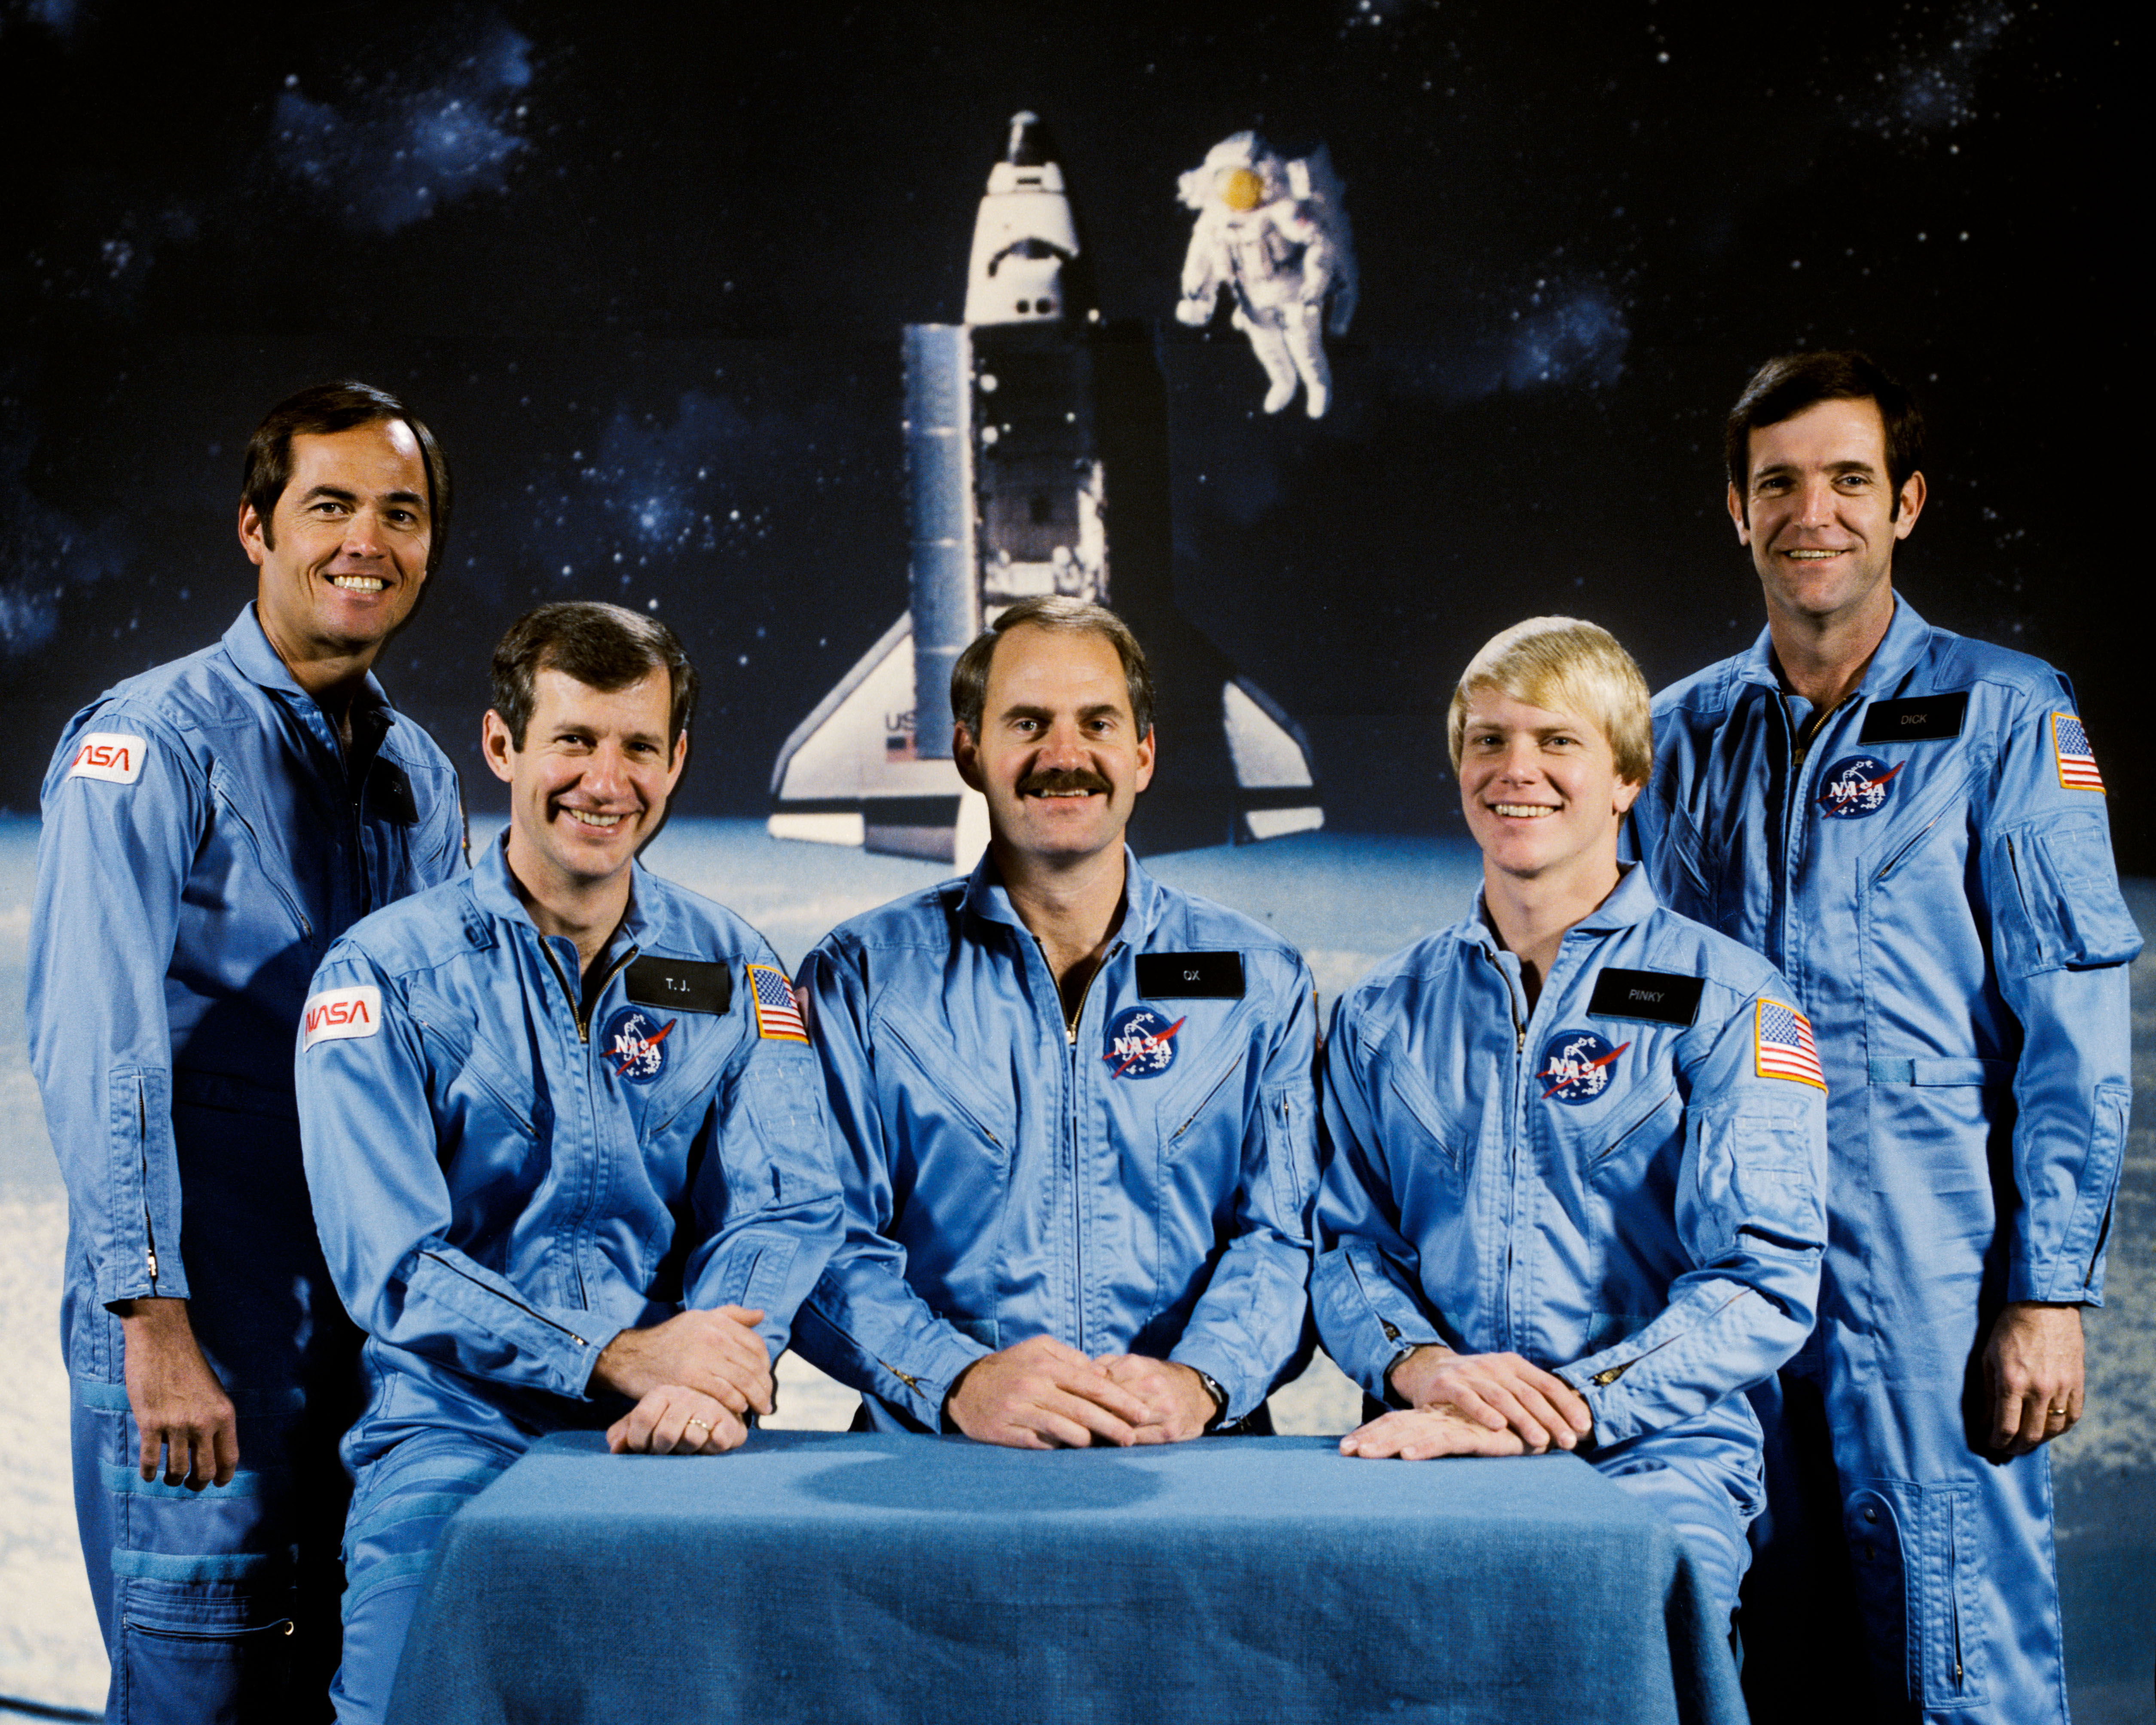 The STS-41C crew of (clockwise from bottom left) Commander Robert L. Crippen, Mission Specialists Terry J. Hart, James D. “Ox” Van Hoften, and George D. “Pinky” Nelson, and Pilot Francis R. “Dick” Scobee